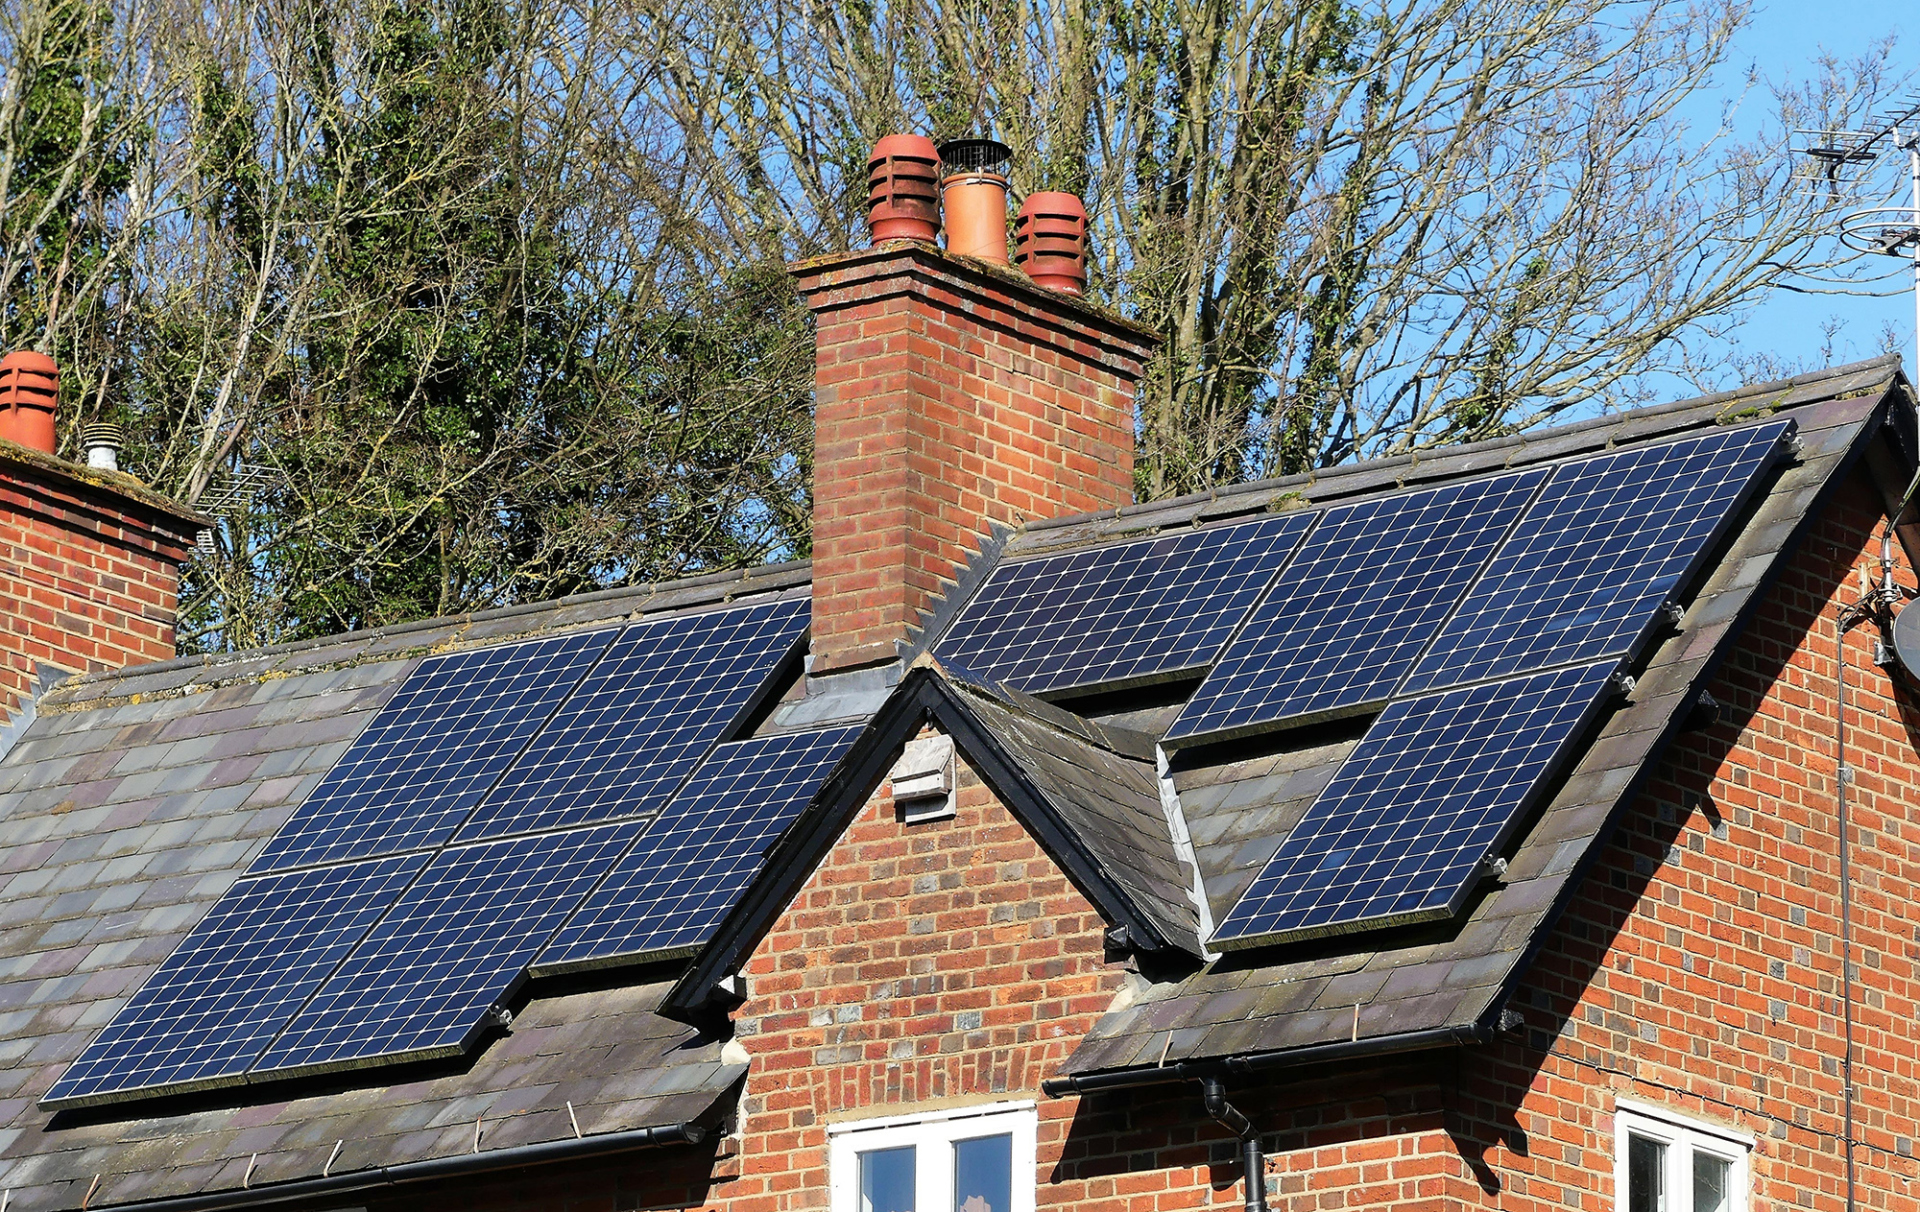 Solar panels installed on the roof of a home with large trees in the background.